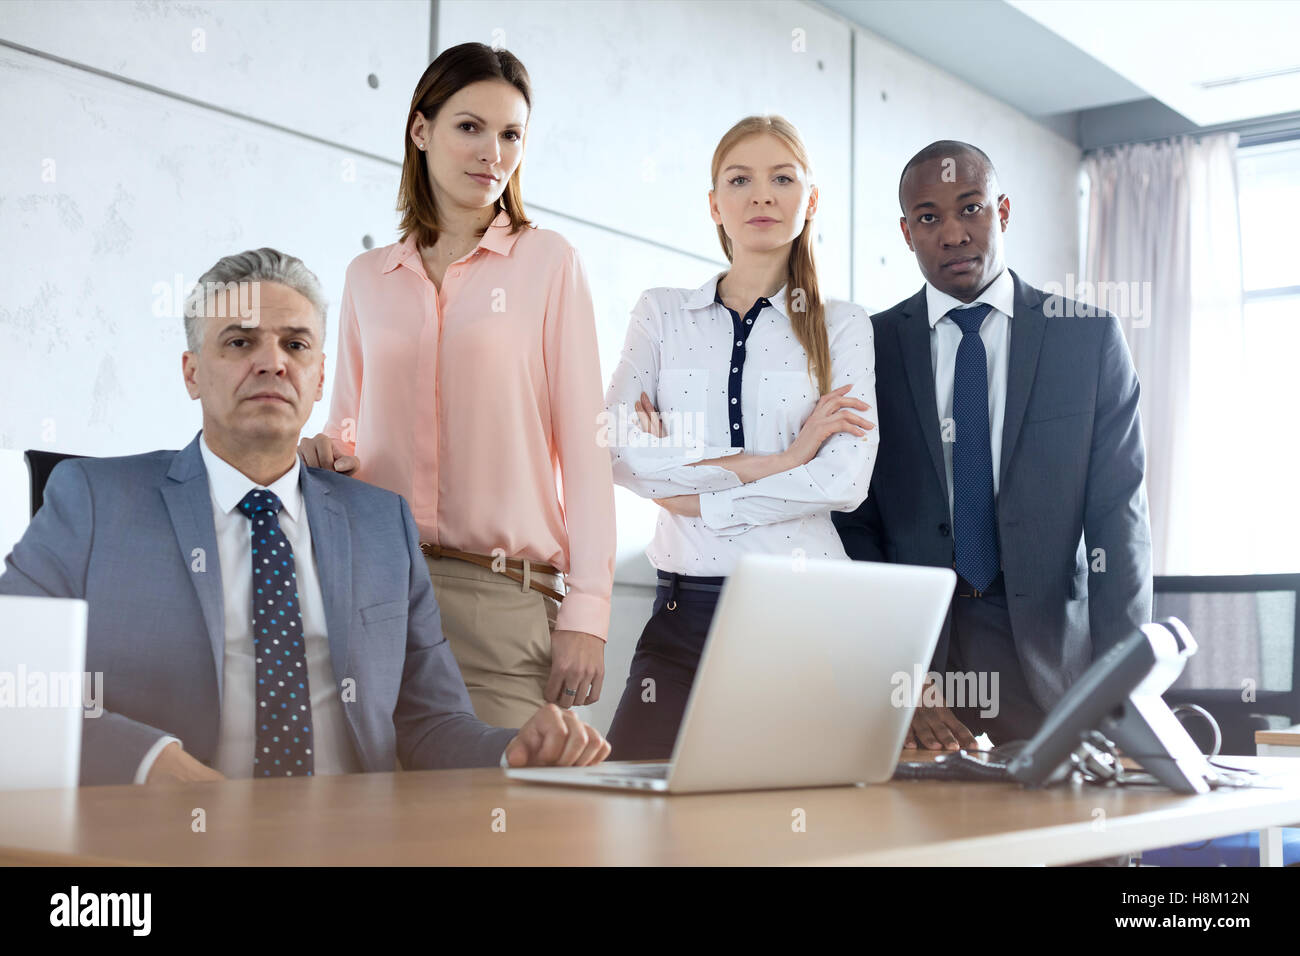 Portrait of multi-ethnic business people at desk in office Banque D'Images